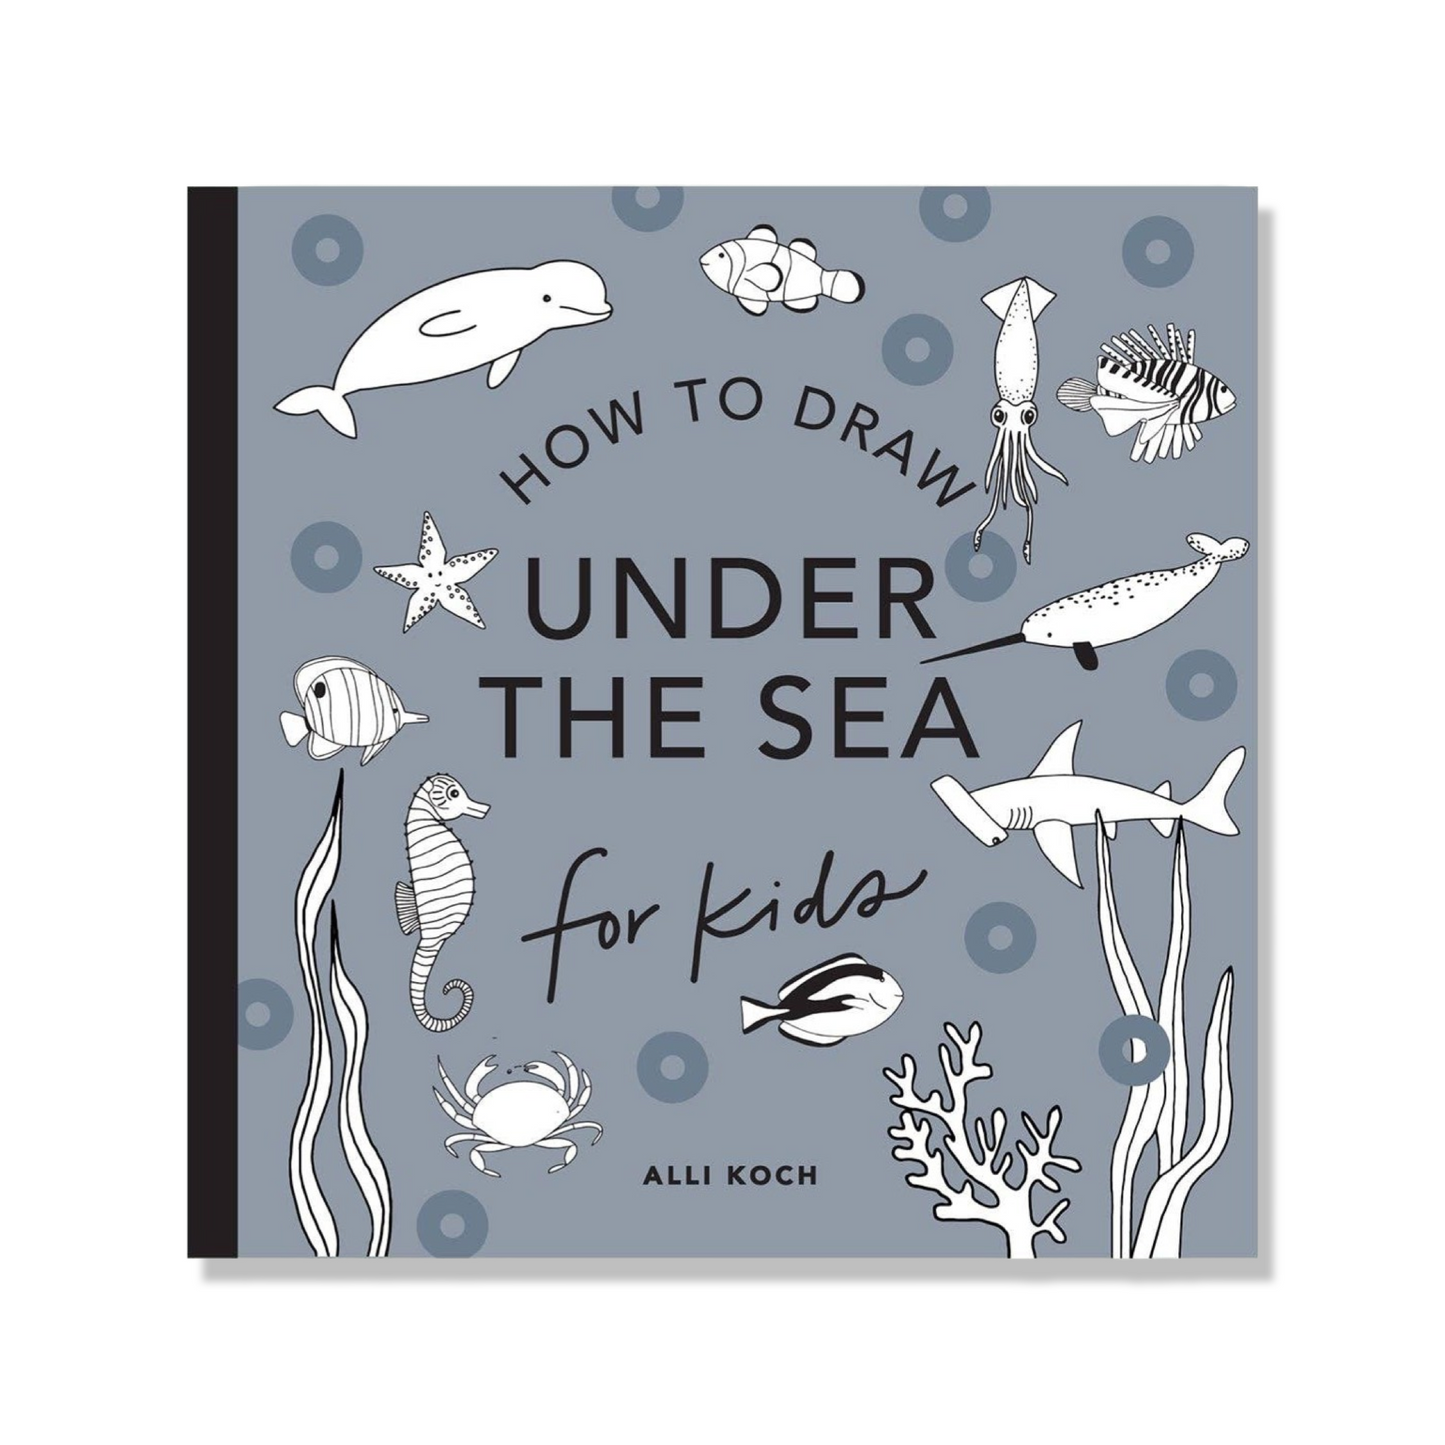 Paige Tate & Co. - Under the Sea: How to Draw Books for Kids